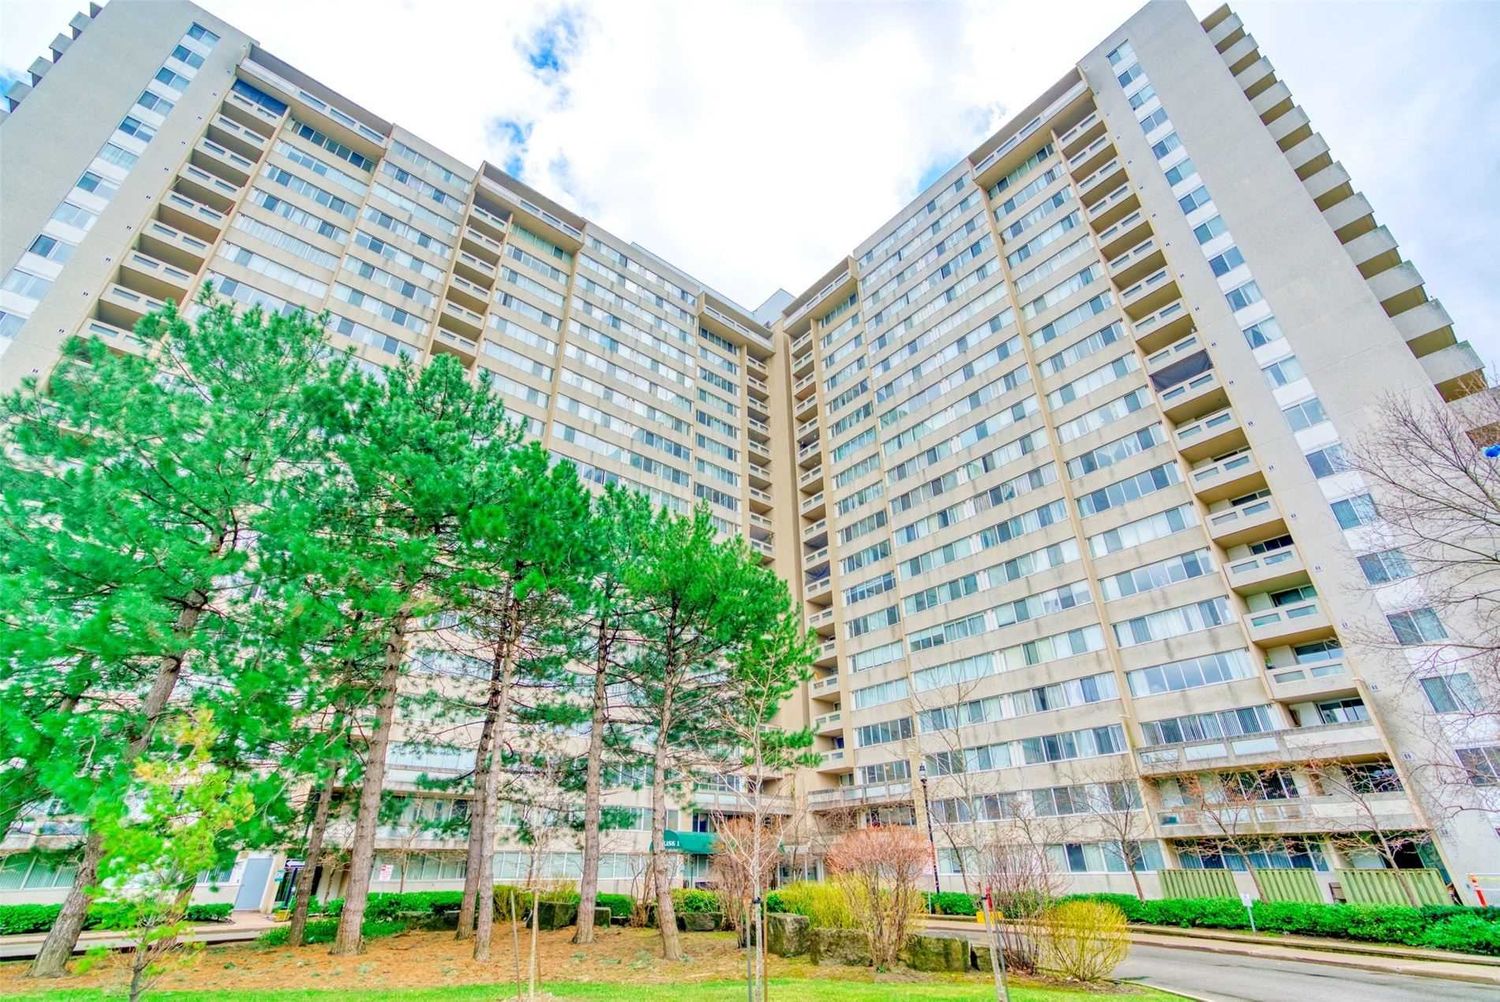 3590 Kaneff Crescent. 3590 Kaneff Crescent Condos is located in  Mississauga, Toronto - image #2 of 3